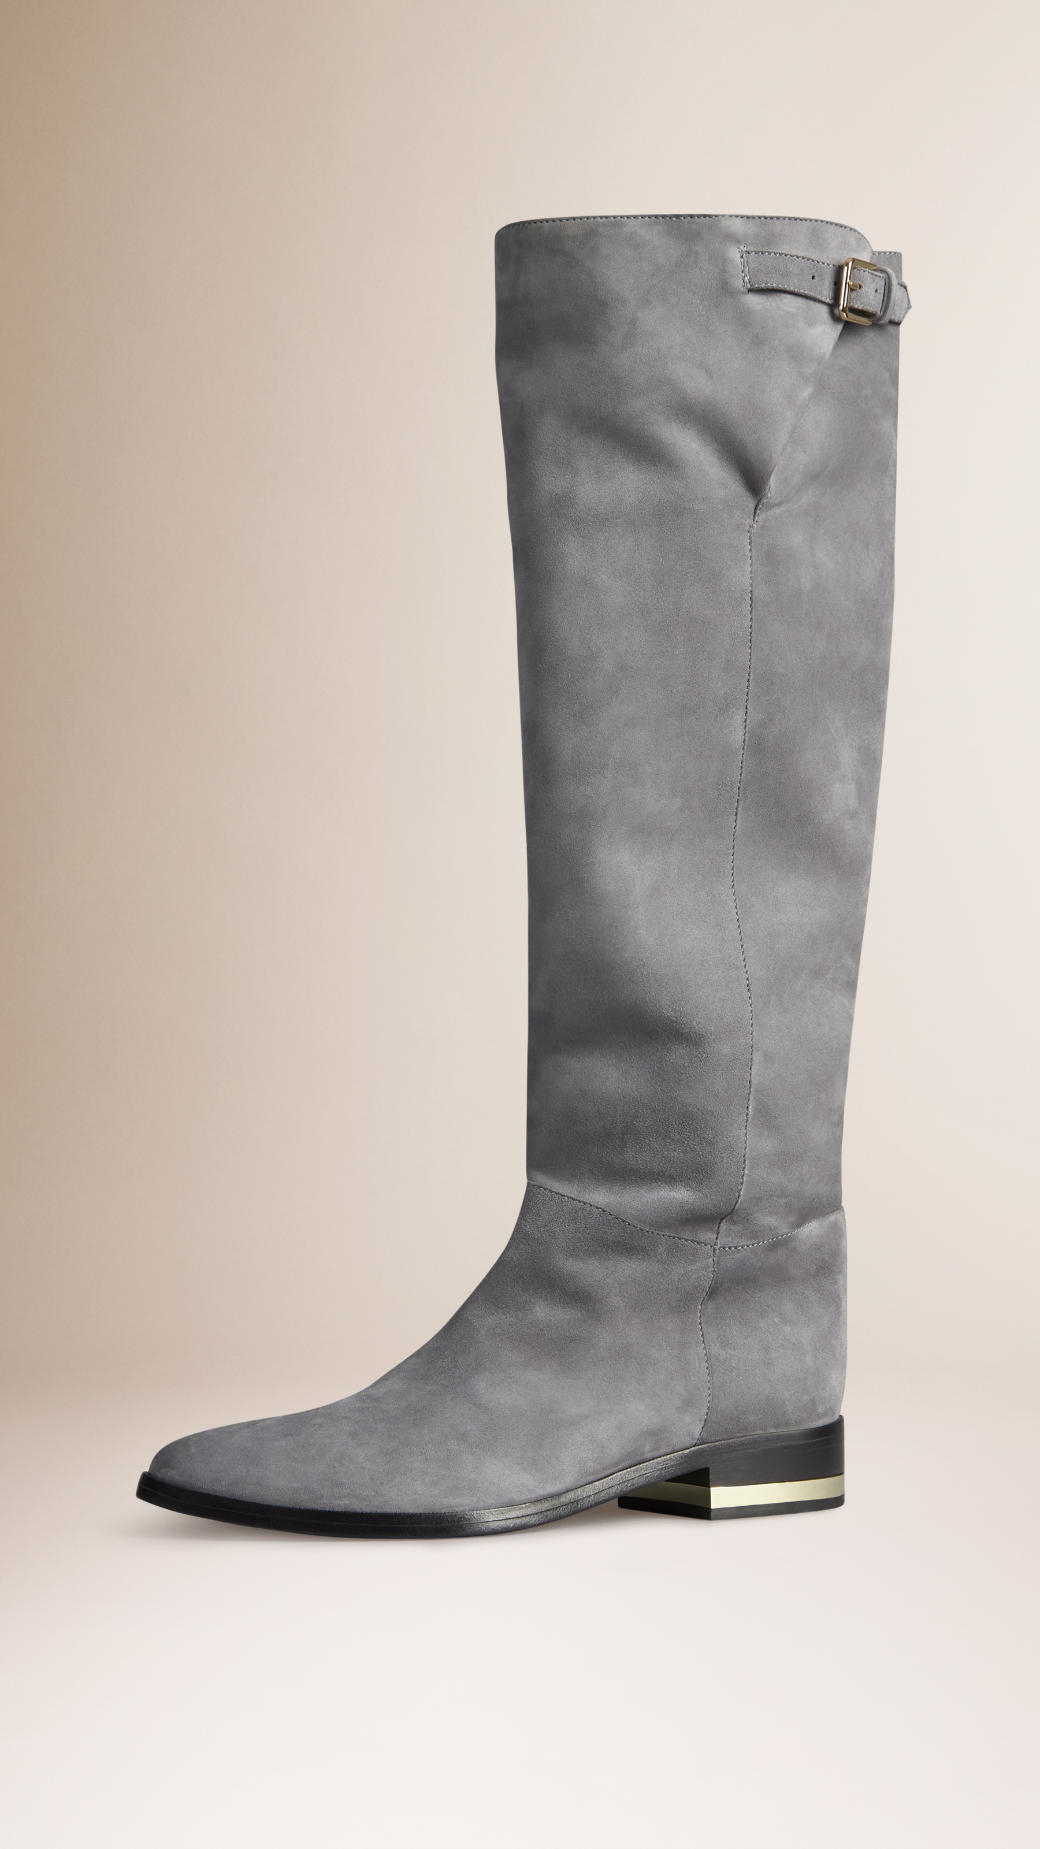 Lyst - Burberry Over-the-knee Suede Riding Boots in Gray